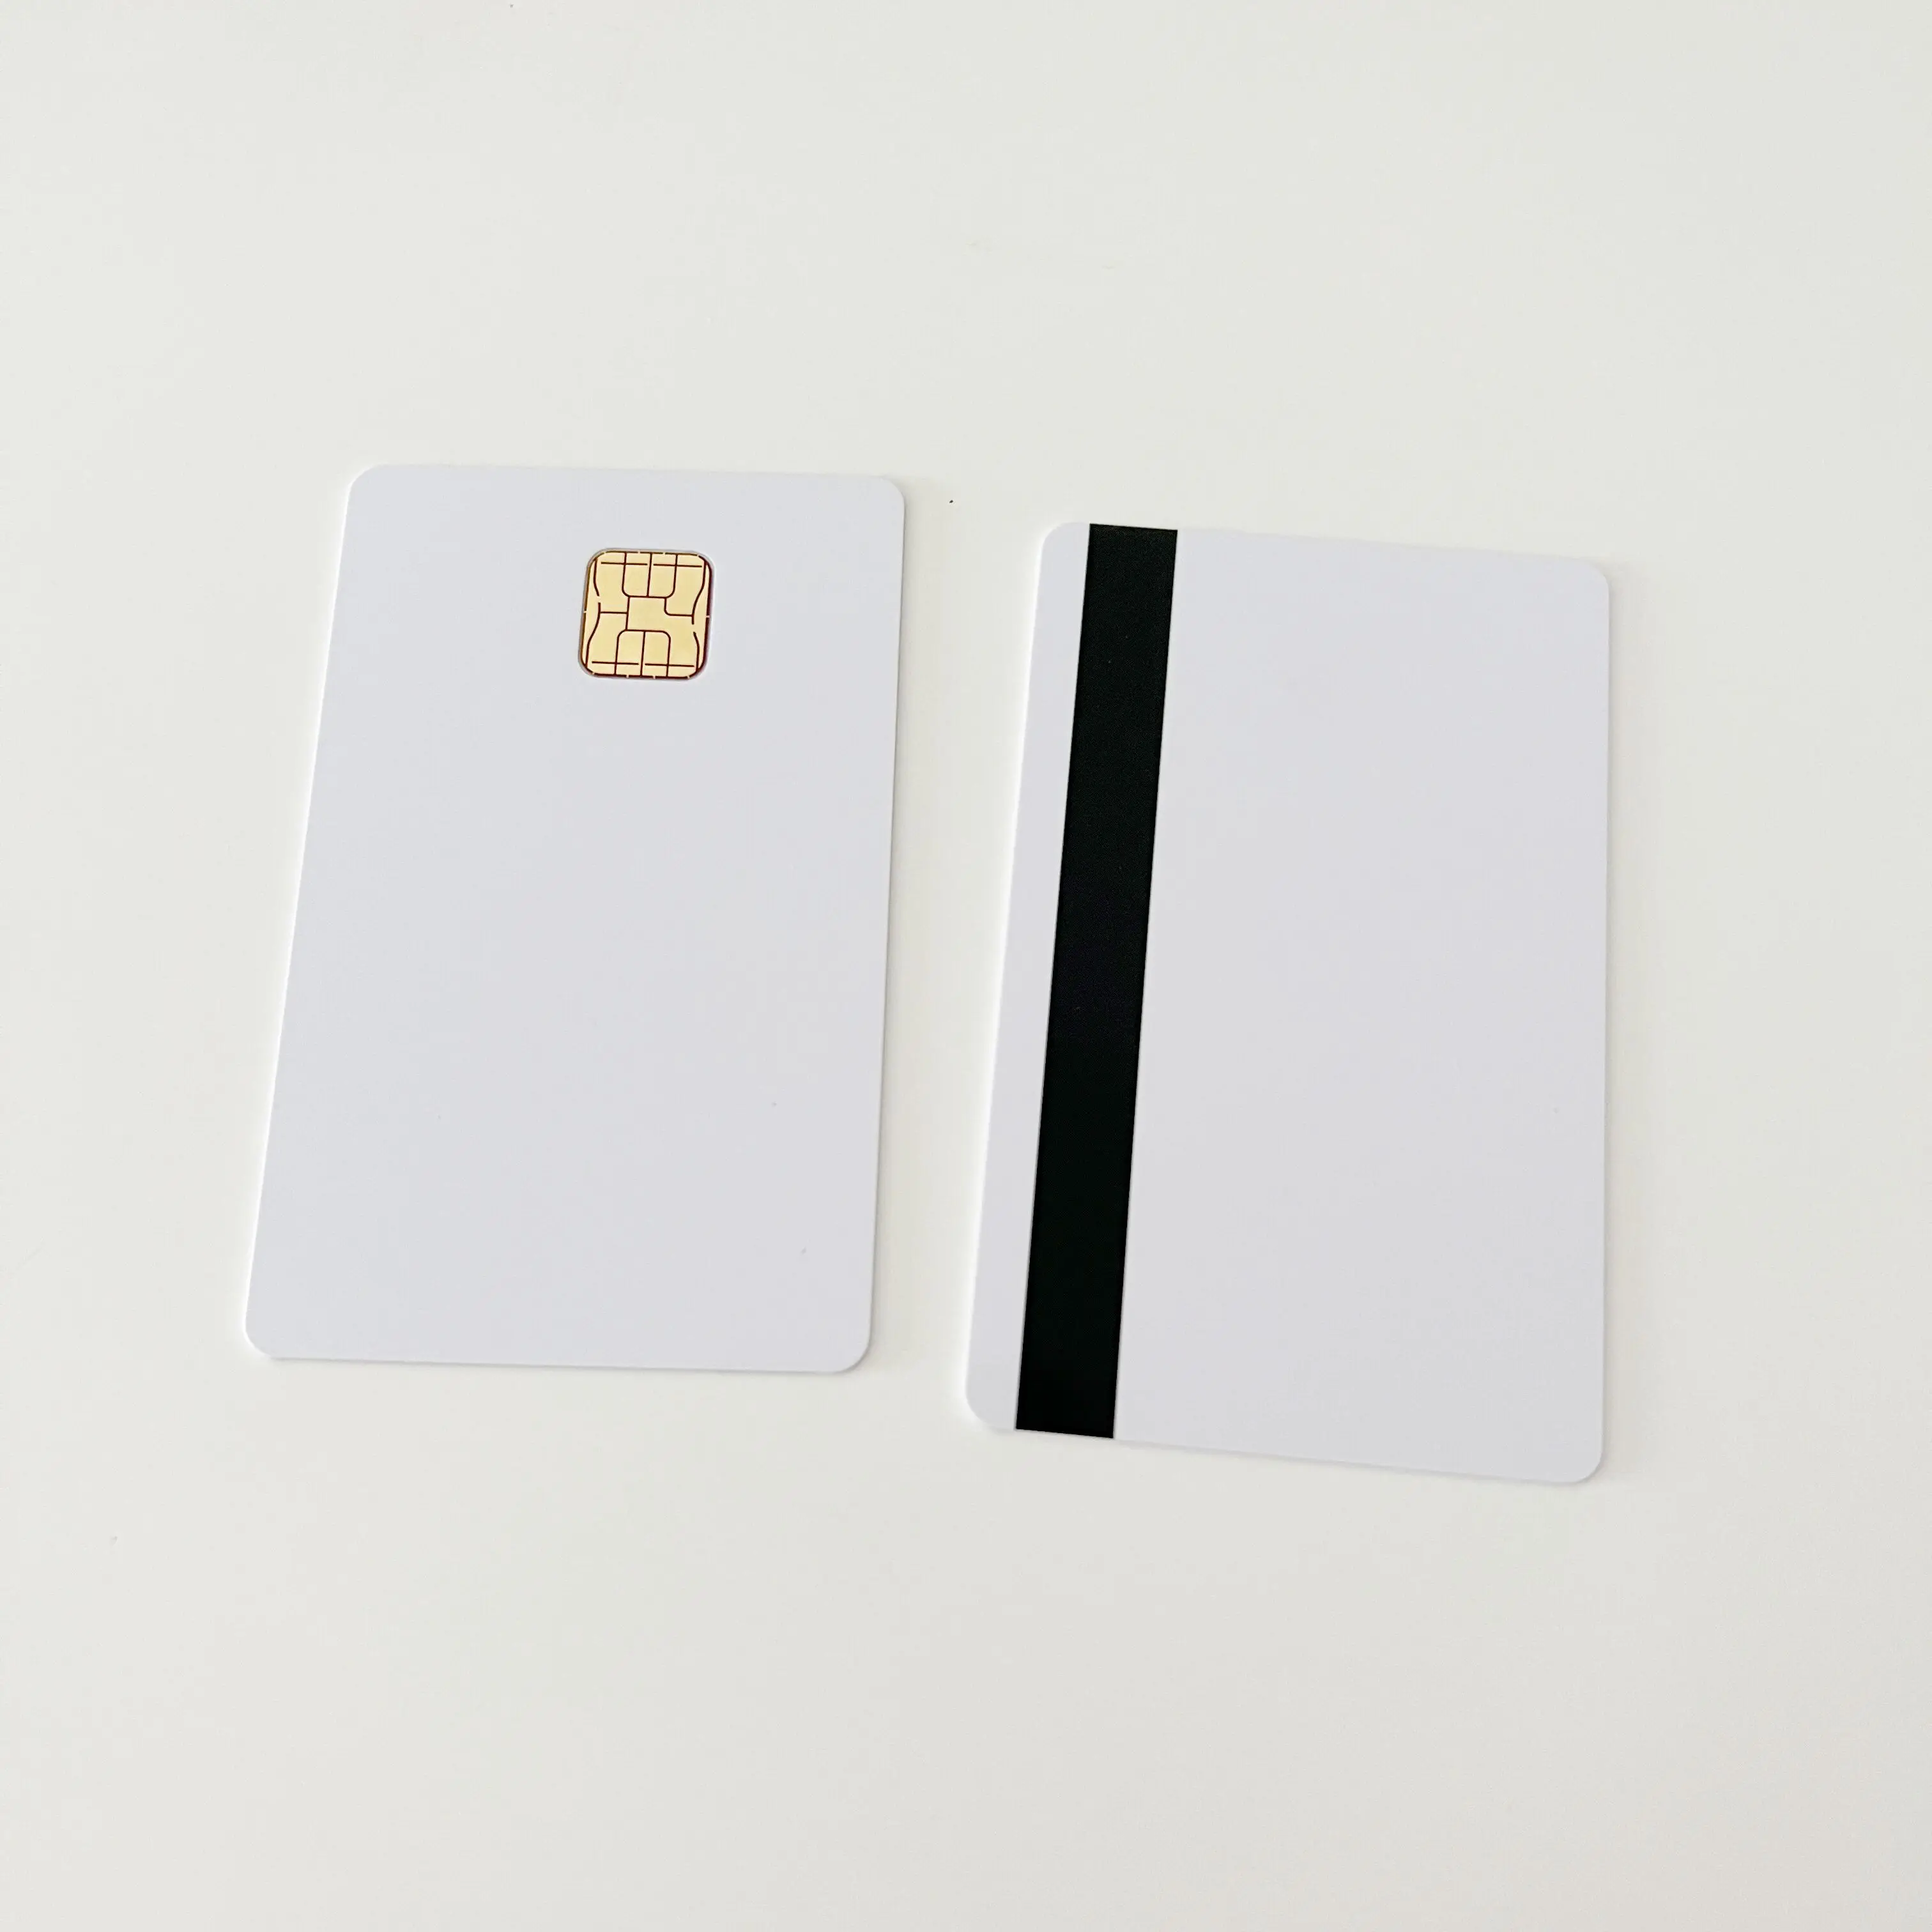 J3R180 JCOP4 180K Java Smart Card (Replace UNFUSED J2A040 Chip Java JCOP) with 2 Track 8.4mm HICO Magnetic Stripe